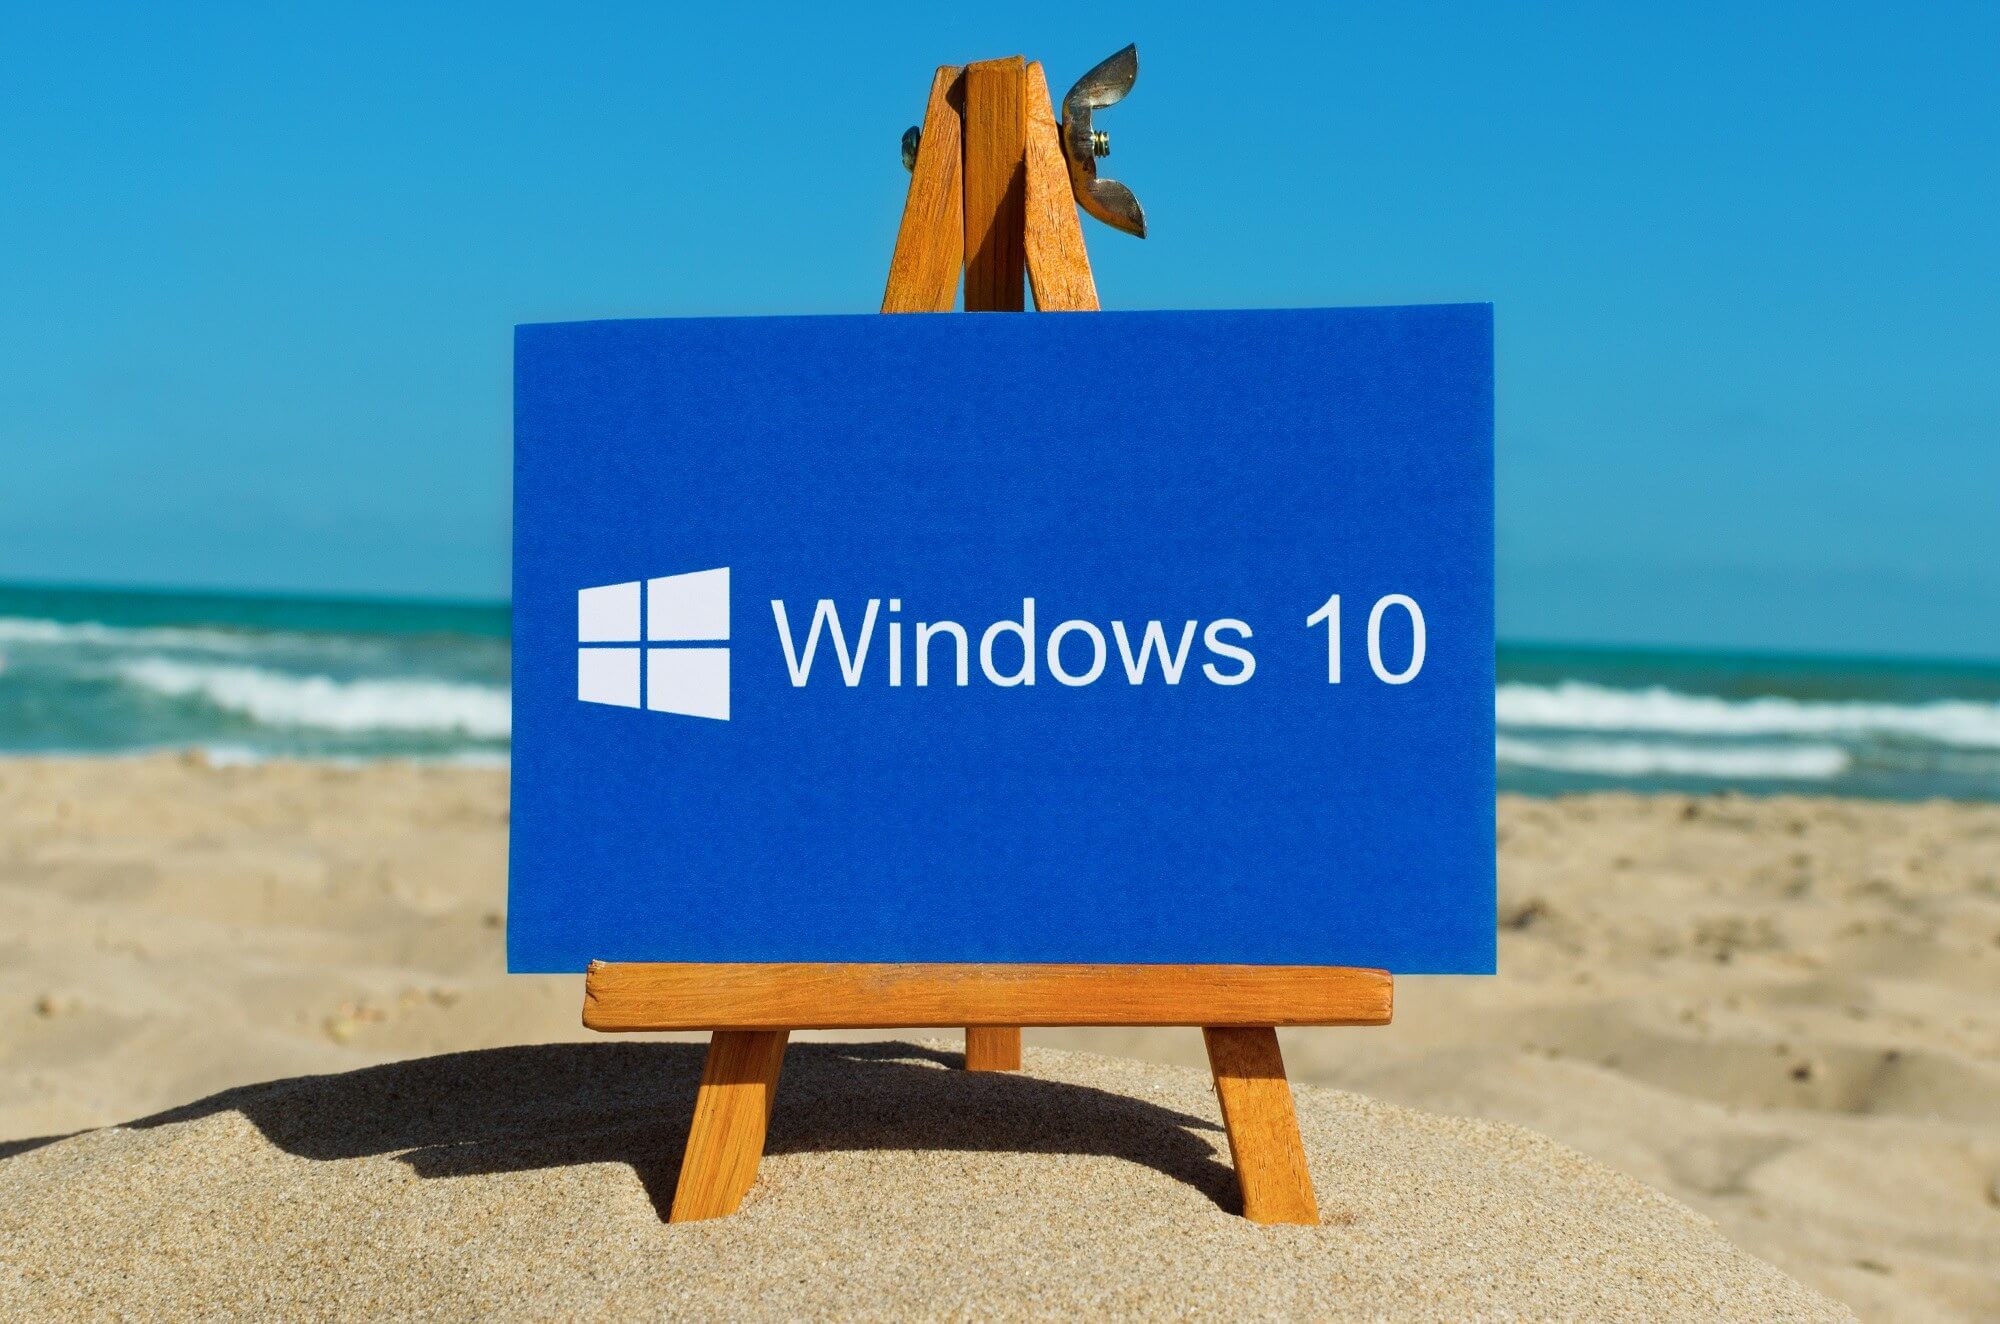 Upcoming feature will explain changes introduced by big Windows 10 updates